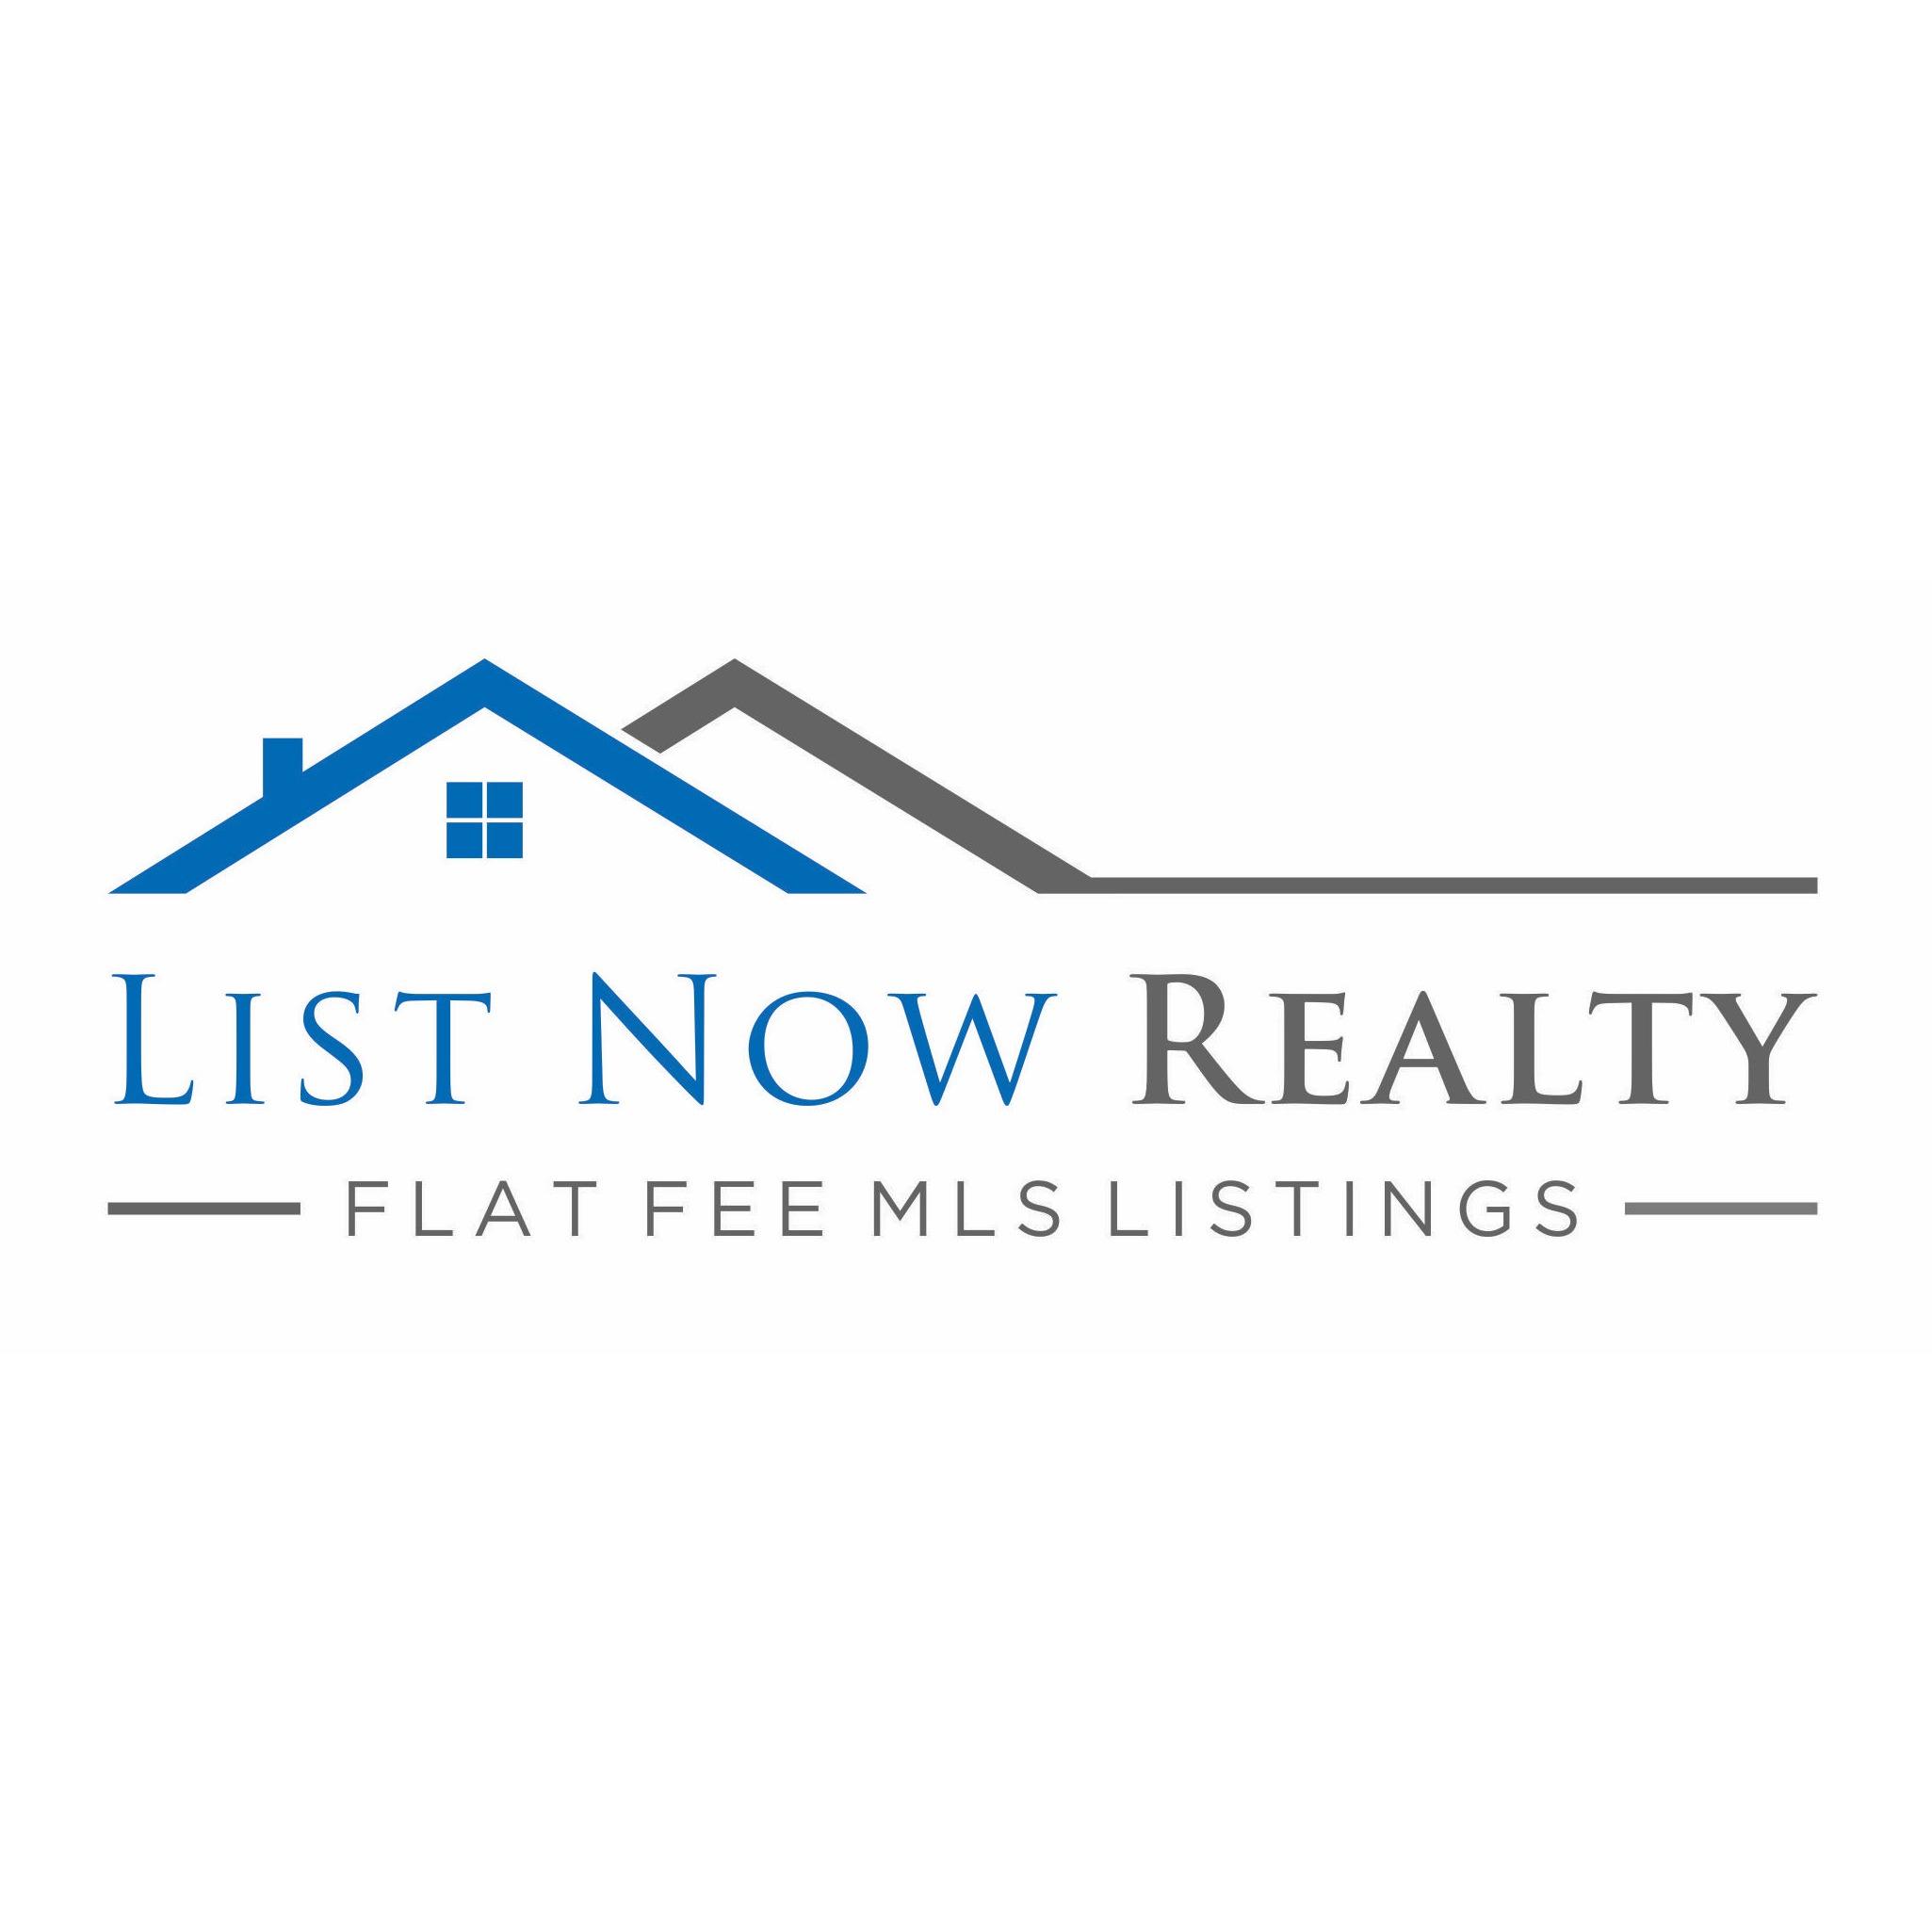 List Now Realty